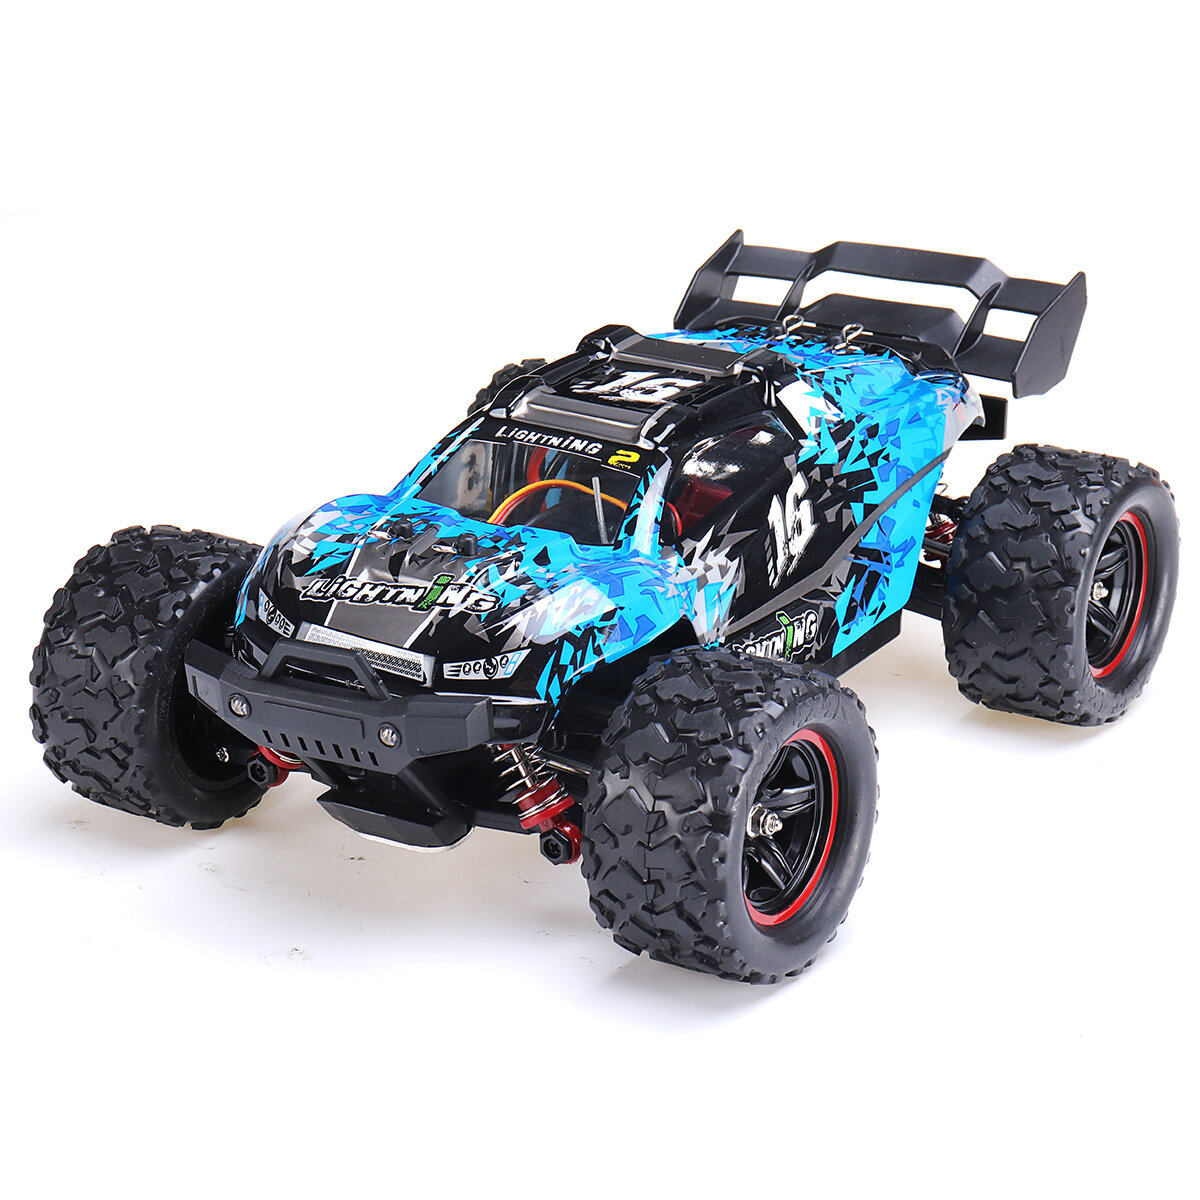 HS 18421 18422 18423 1/18 2.4G Alloy Brushless Off Road High Speed RC Car Vehicle Models Full Proportional Control